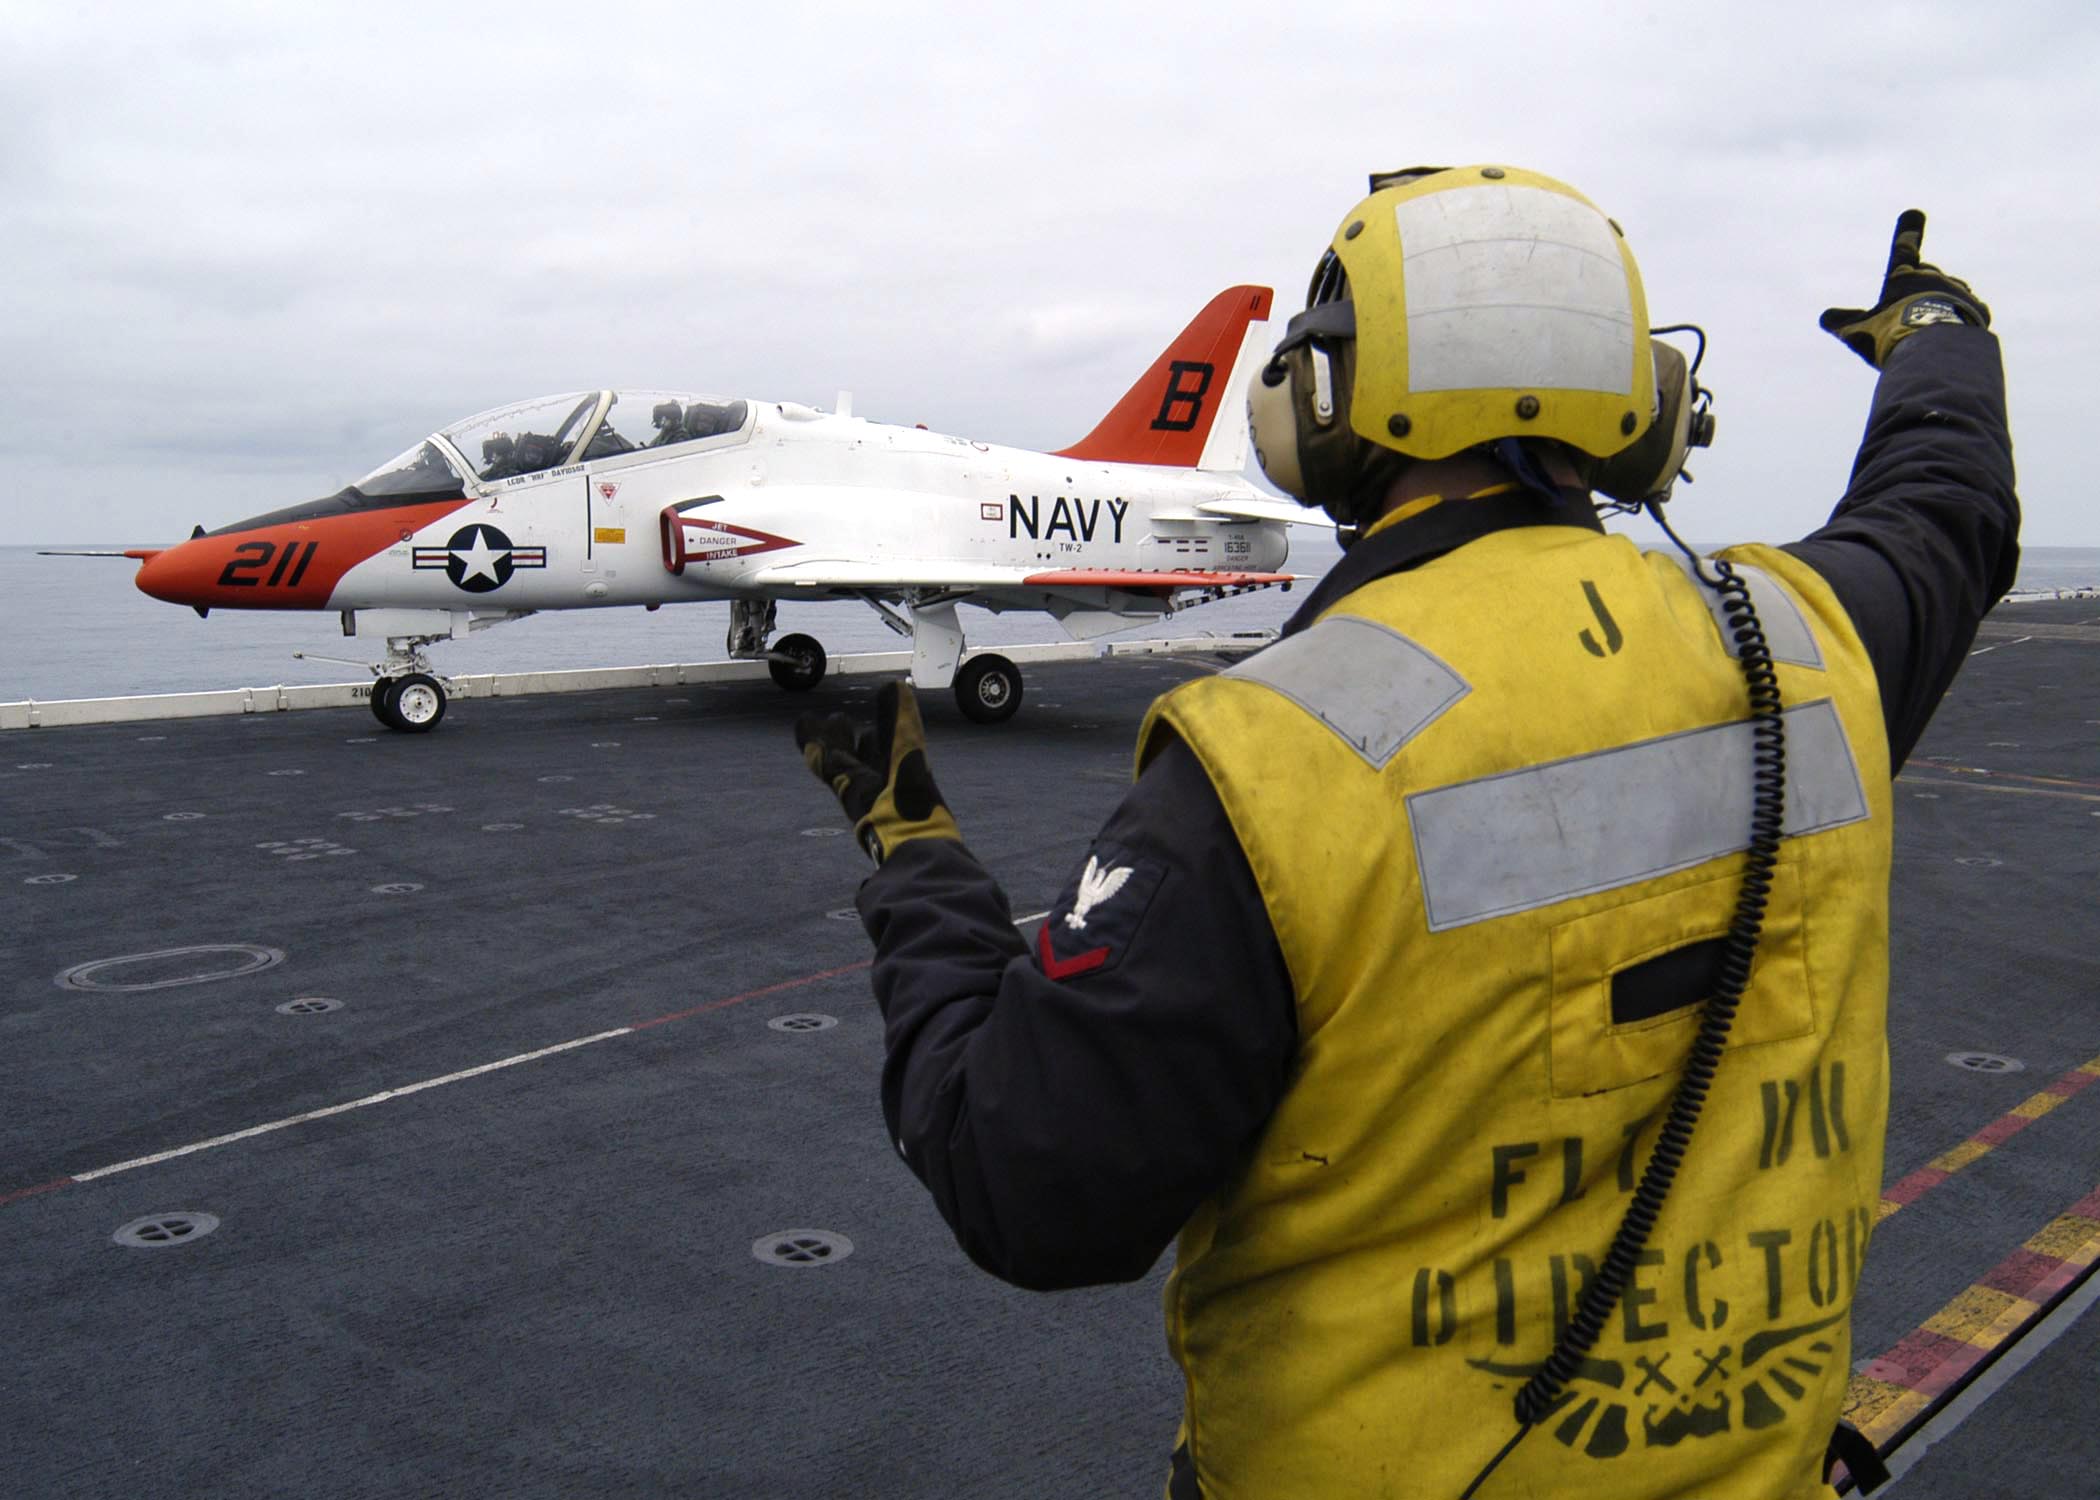 US Navy 040623-N-6817C-040 An Aviation Boatswain's Mate directs a T-45A Goshawk assigned to Training Air Wing Two (TW-2) on the flight deck of USS Abraham Lincoln (CVN 72)